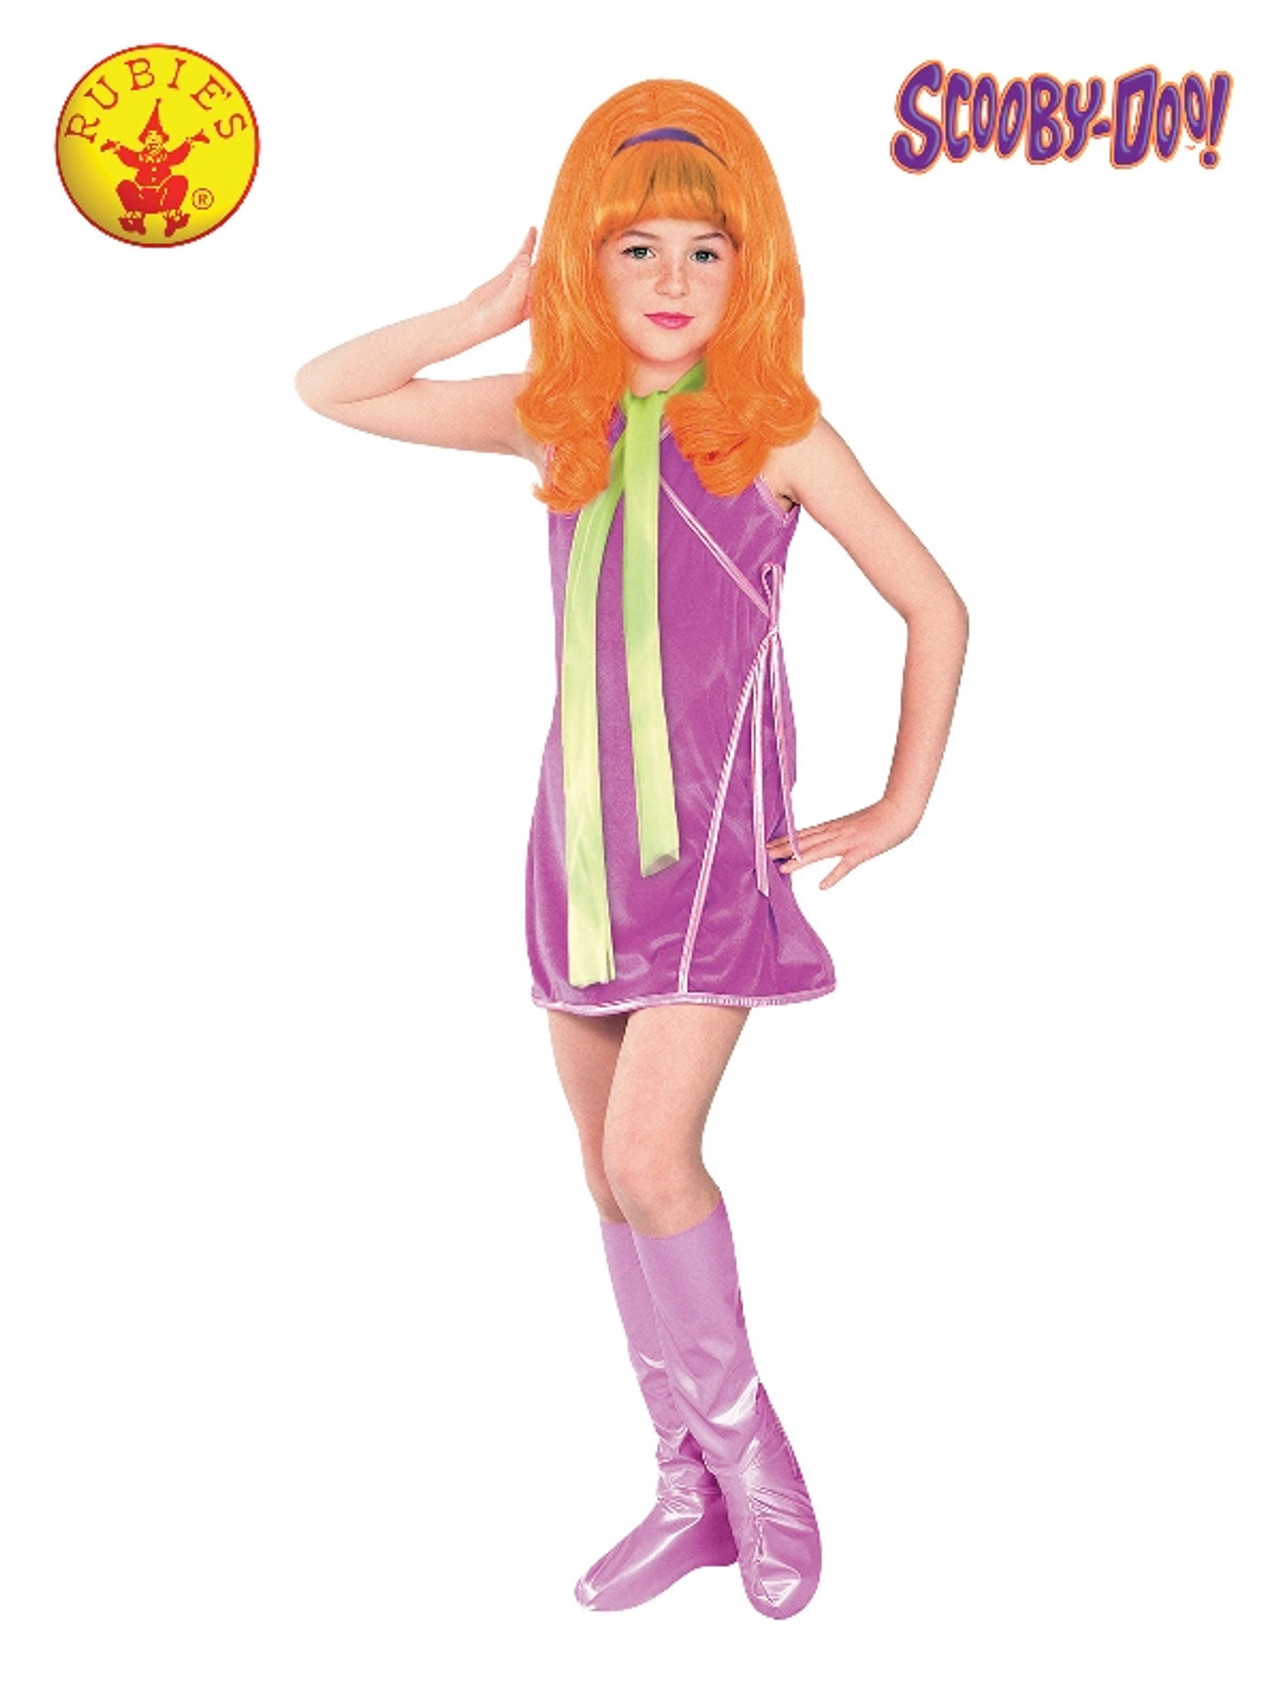 Daphne Girls Costume | Scooby Doo | Costumes To Buy Perth